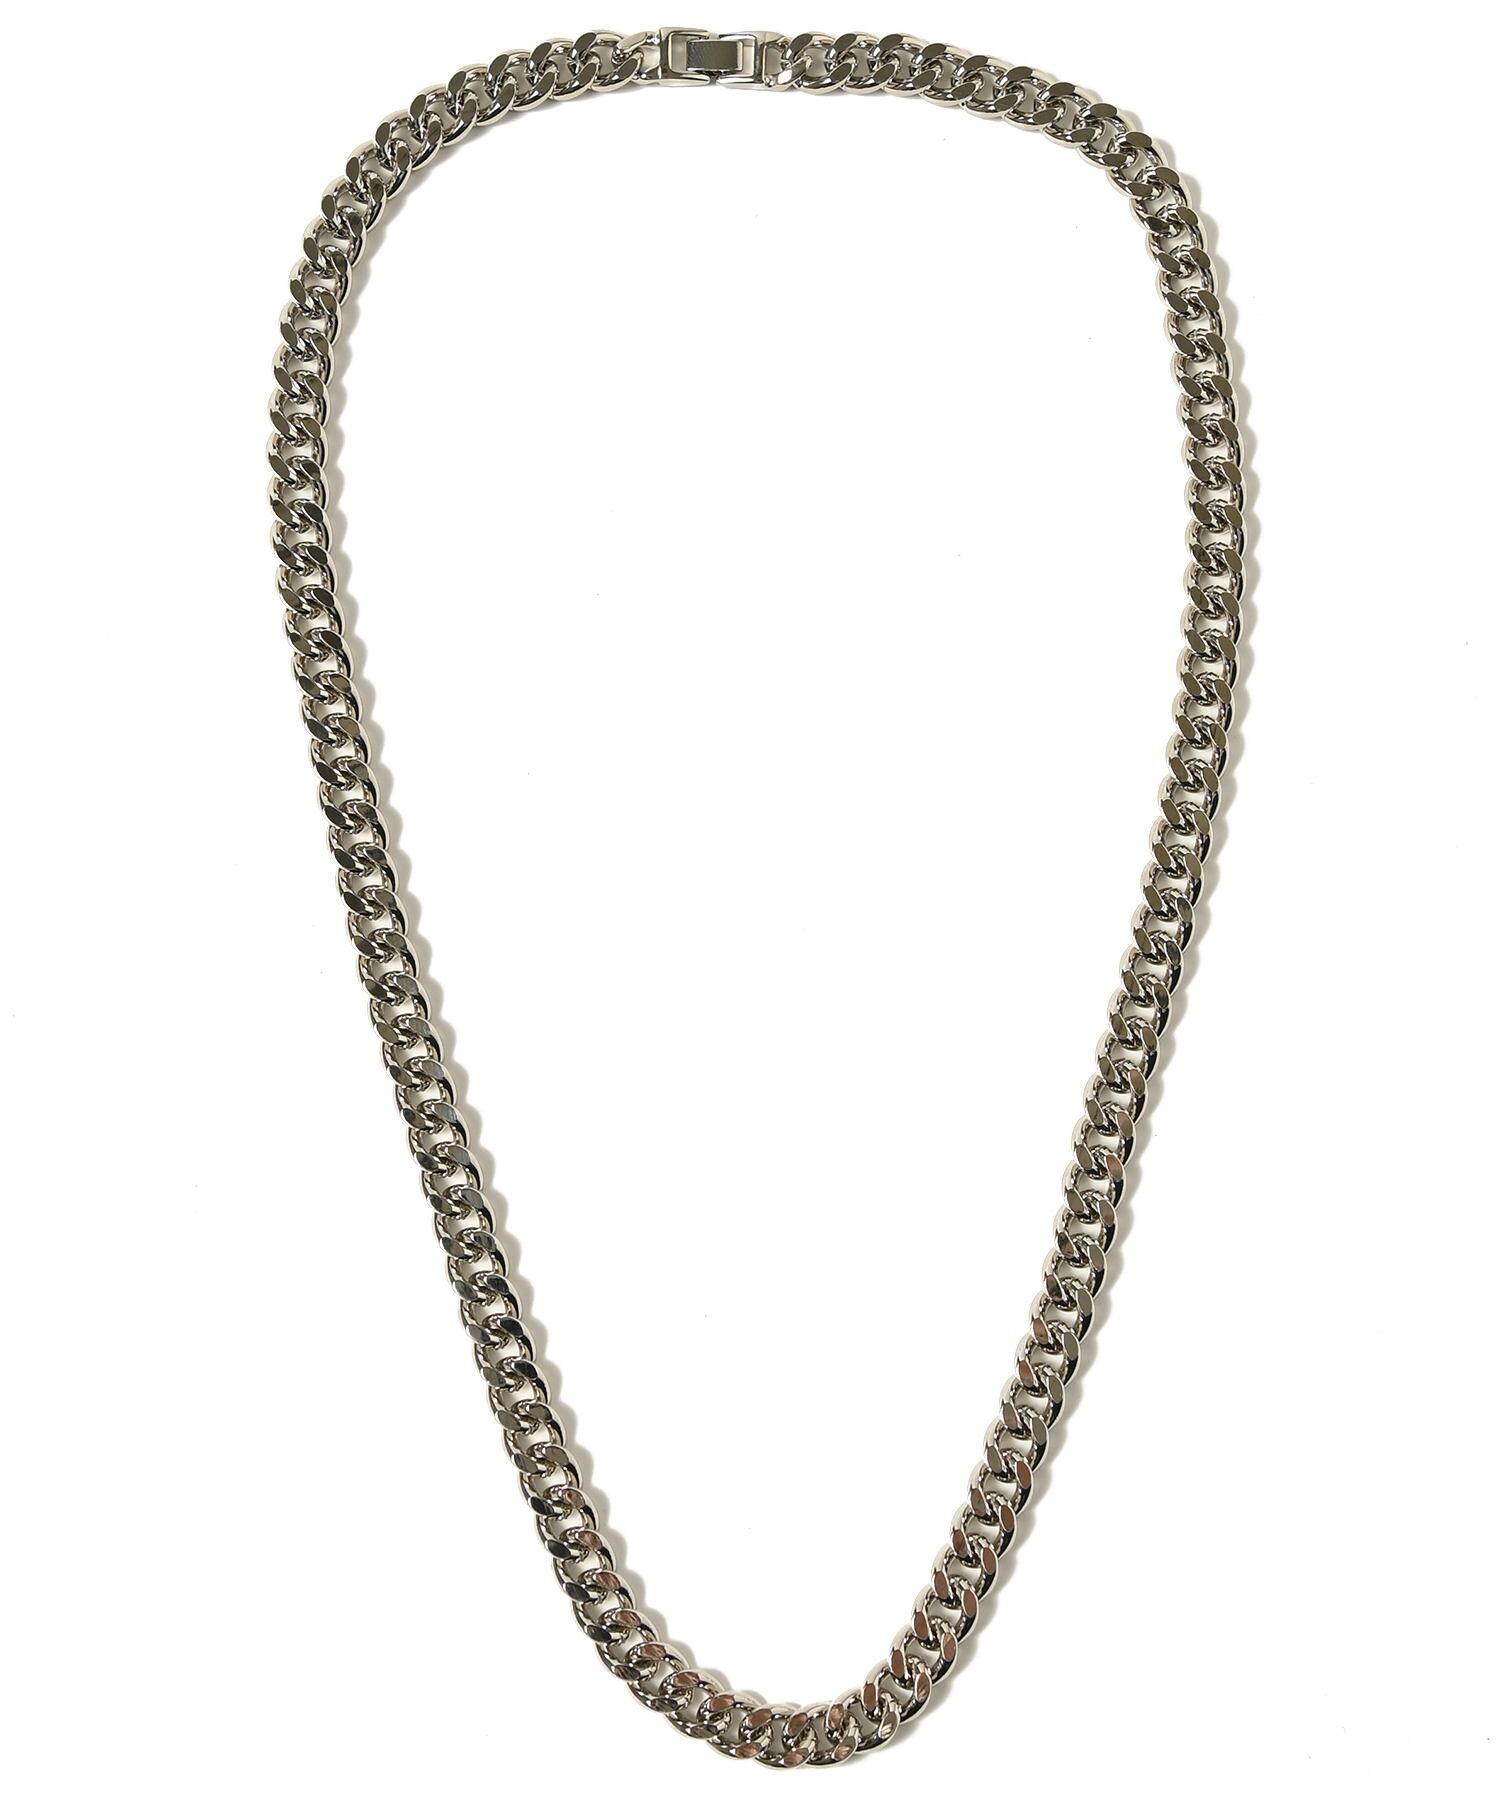 DEPROID chain necklace-10 (SLV) DP-244-2